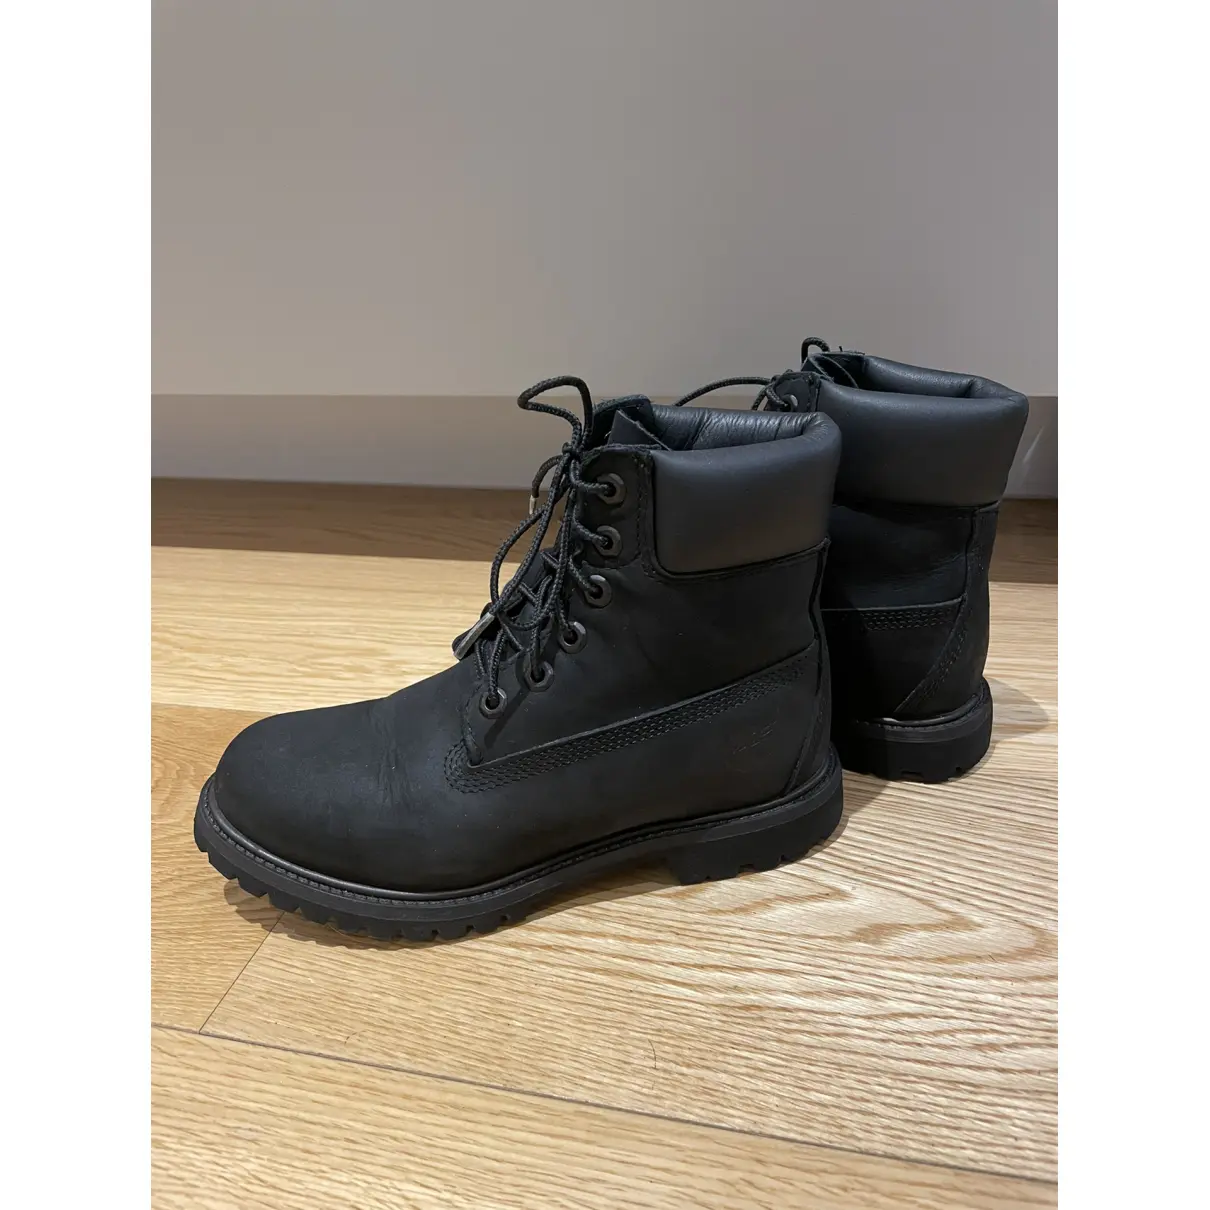 Buy Timberland Leather ankle boots online